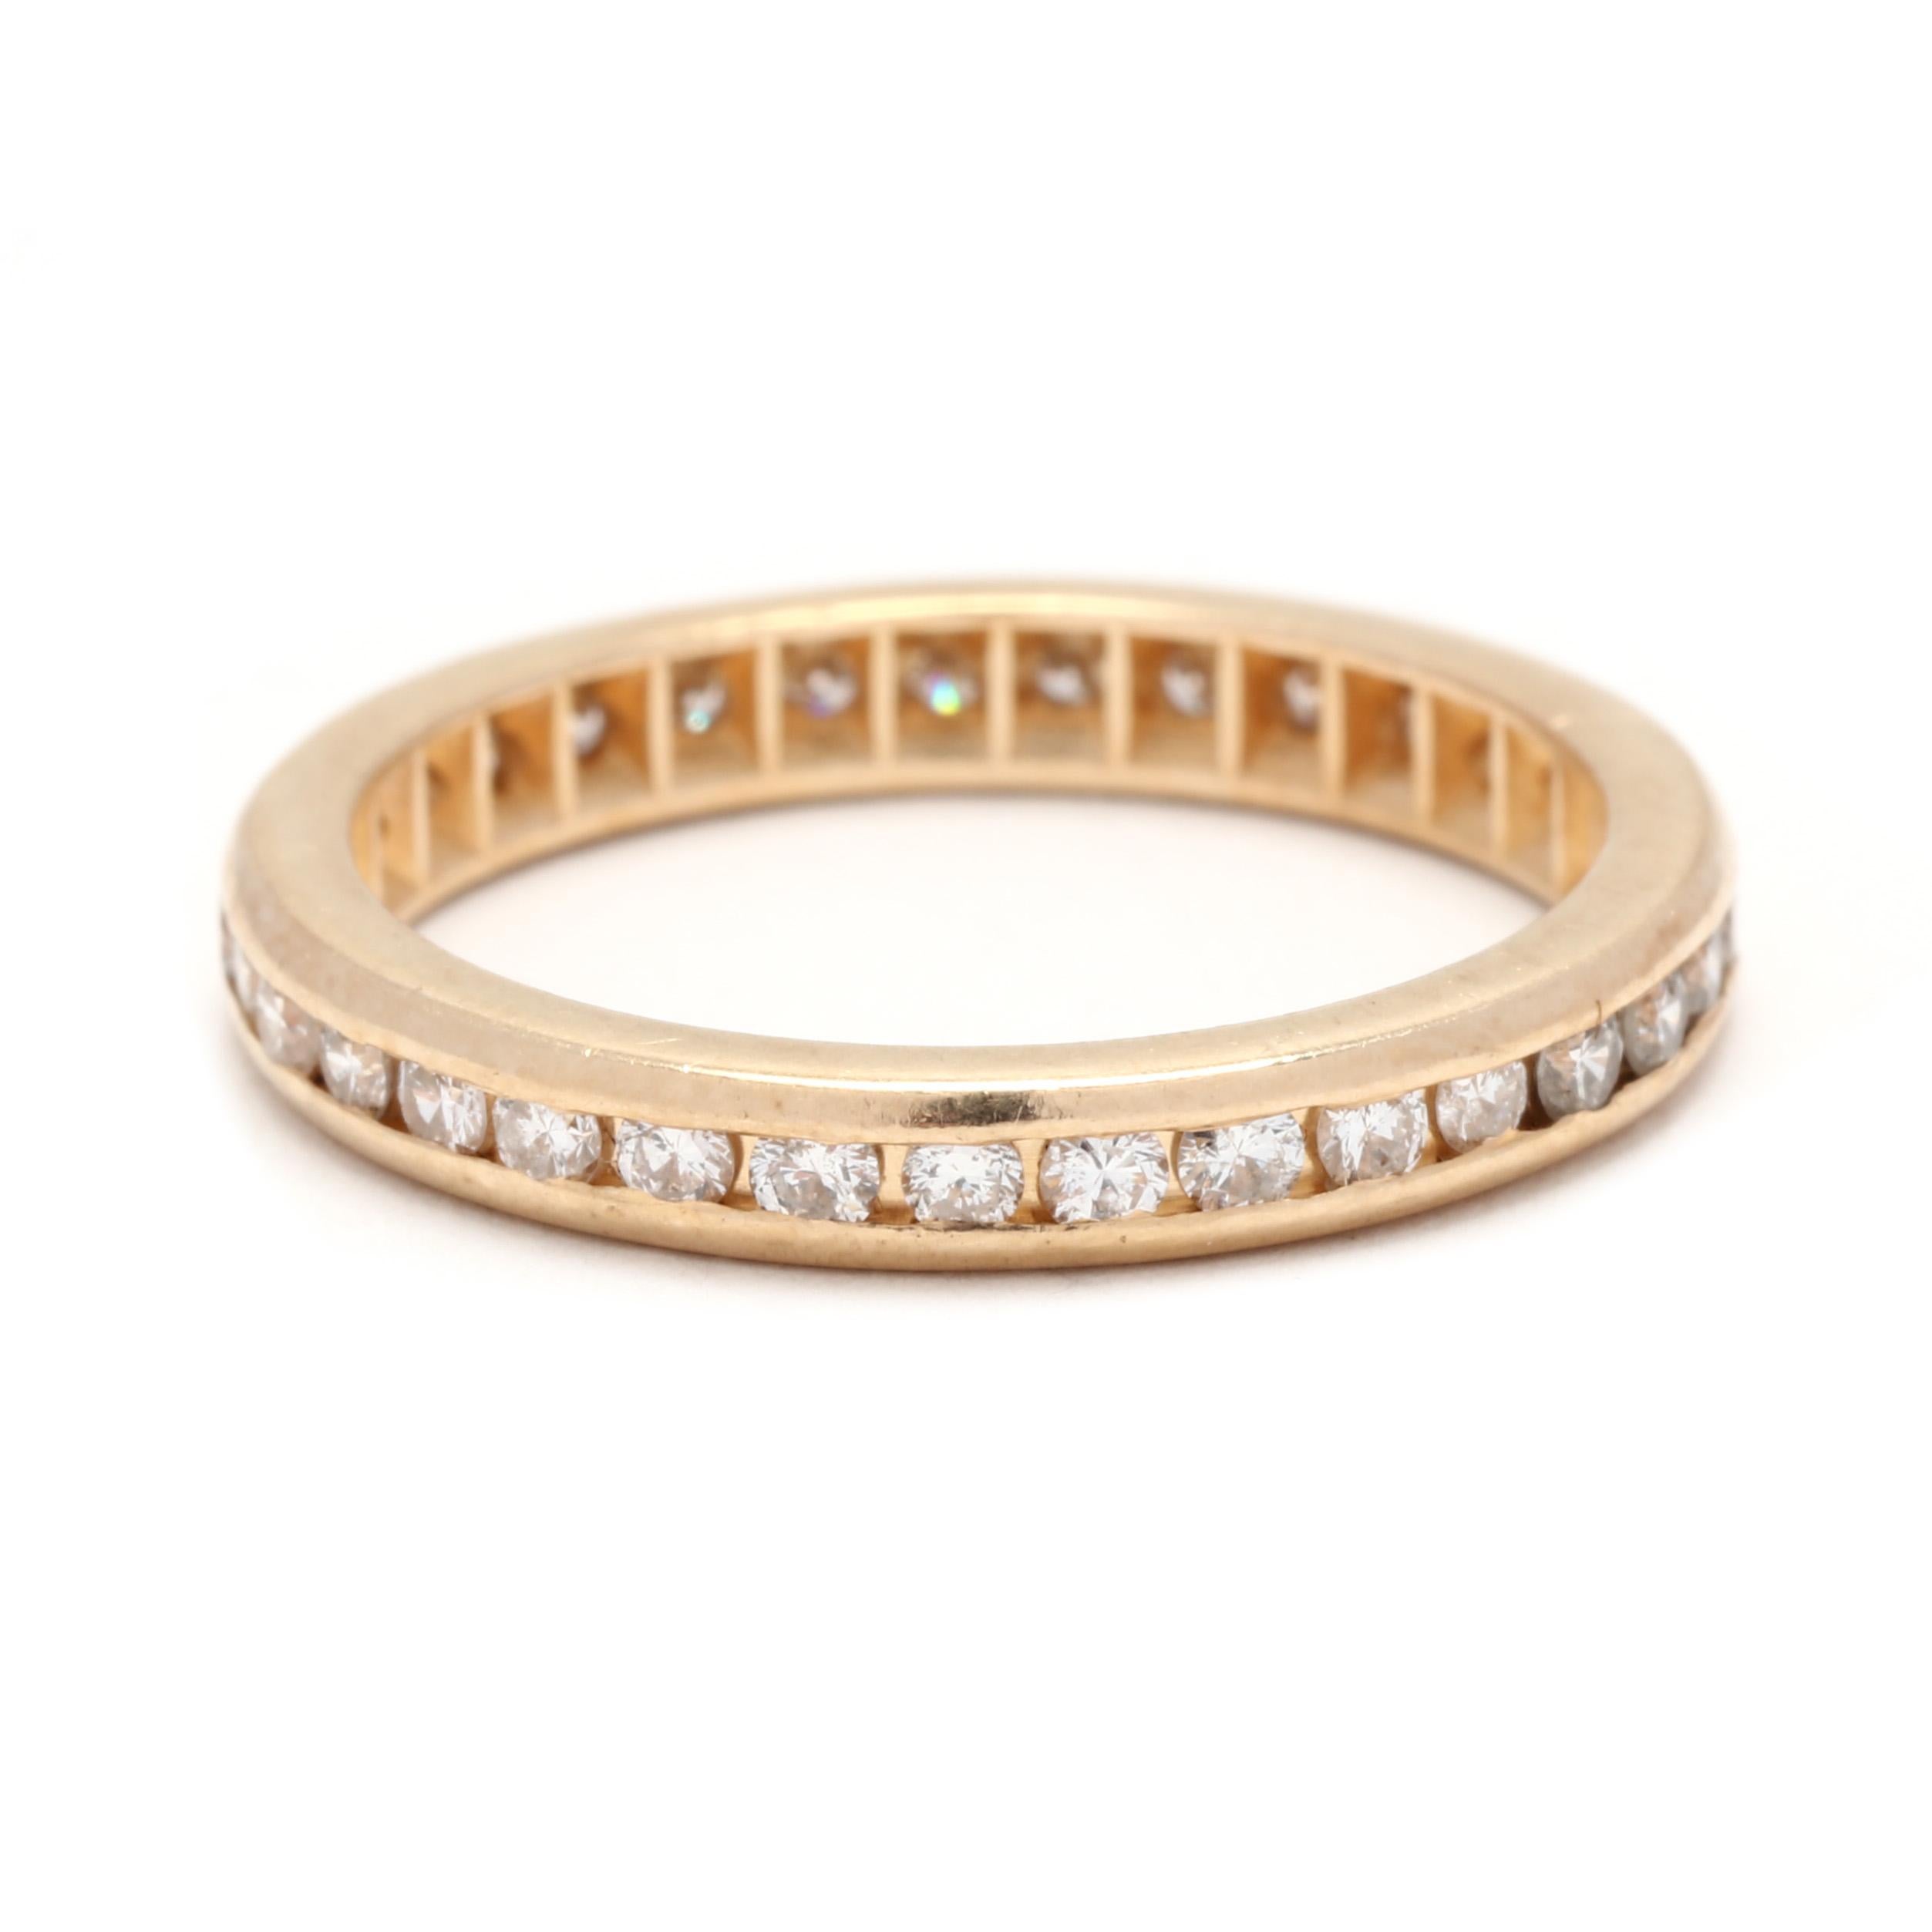 A vintage 14 karat yellow gold channel diamond eternity wedding band. This stackable eternity band features a thin eternity design with channel set round brilliant cut diamonds weighing approximately .50 total carats.

Stones:
- diamonds, 32